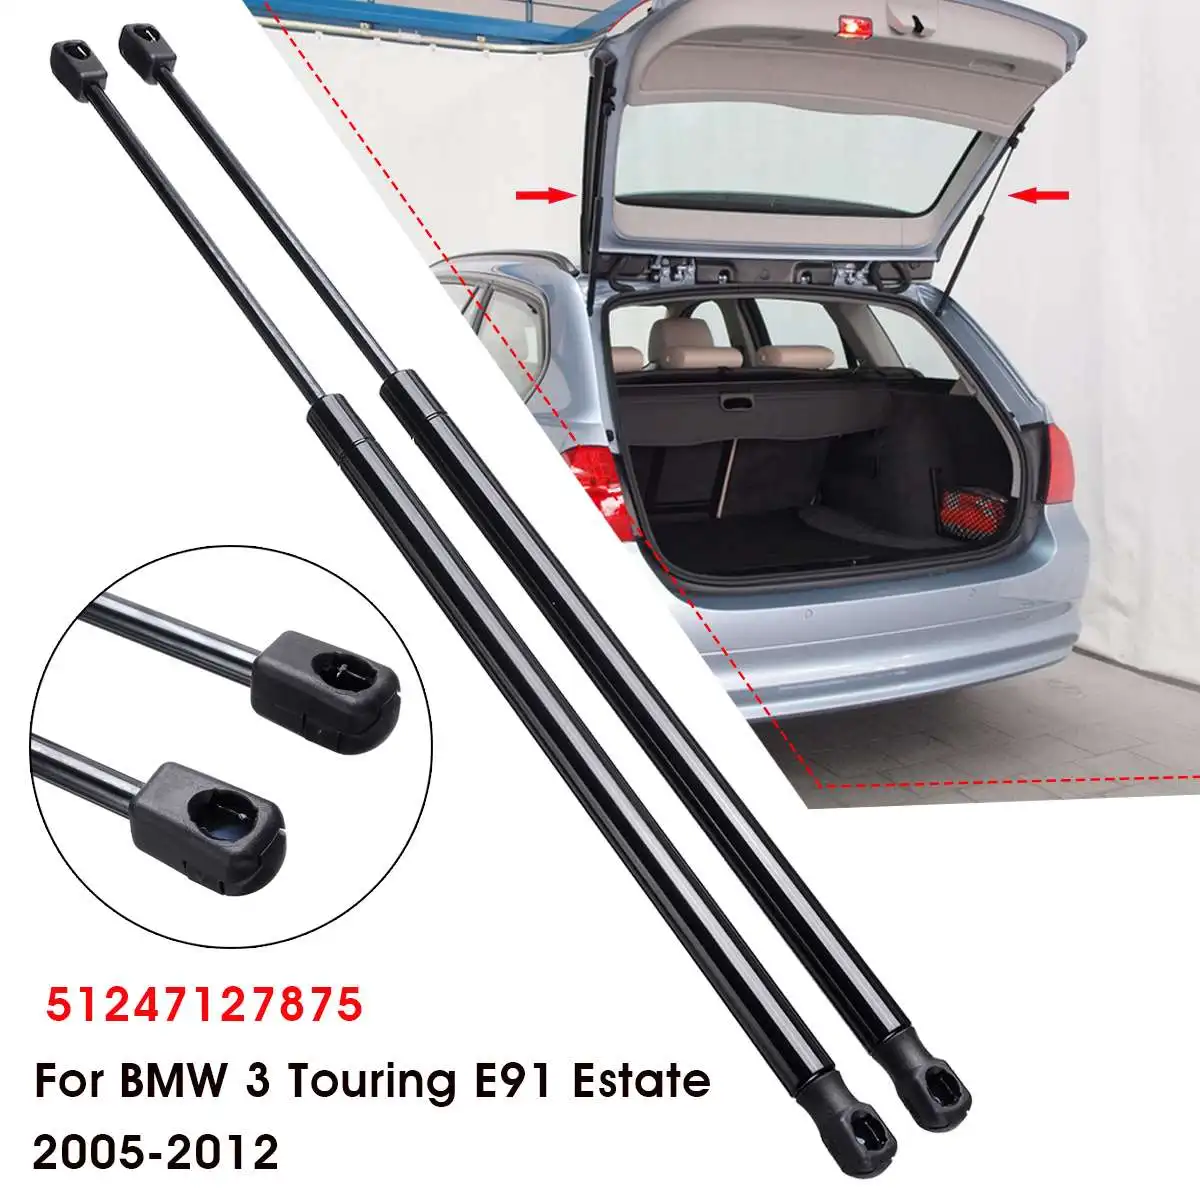 Trunk Hydraulic Holder Lifter Kit Car Boot Strut Gas Springs for BMW 3 Series Touring Estate E91 2004-2012 Rear Tailgate Support Shock Struts Damper Conversion Styling Accessories 